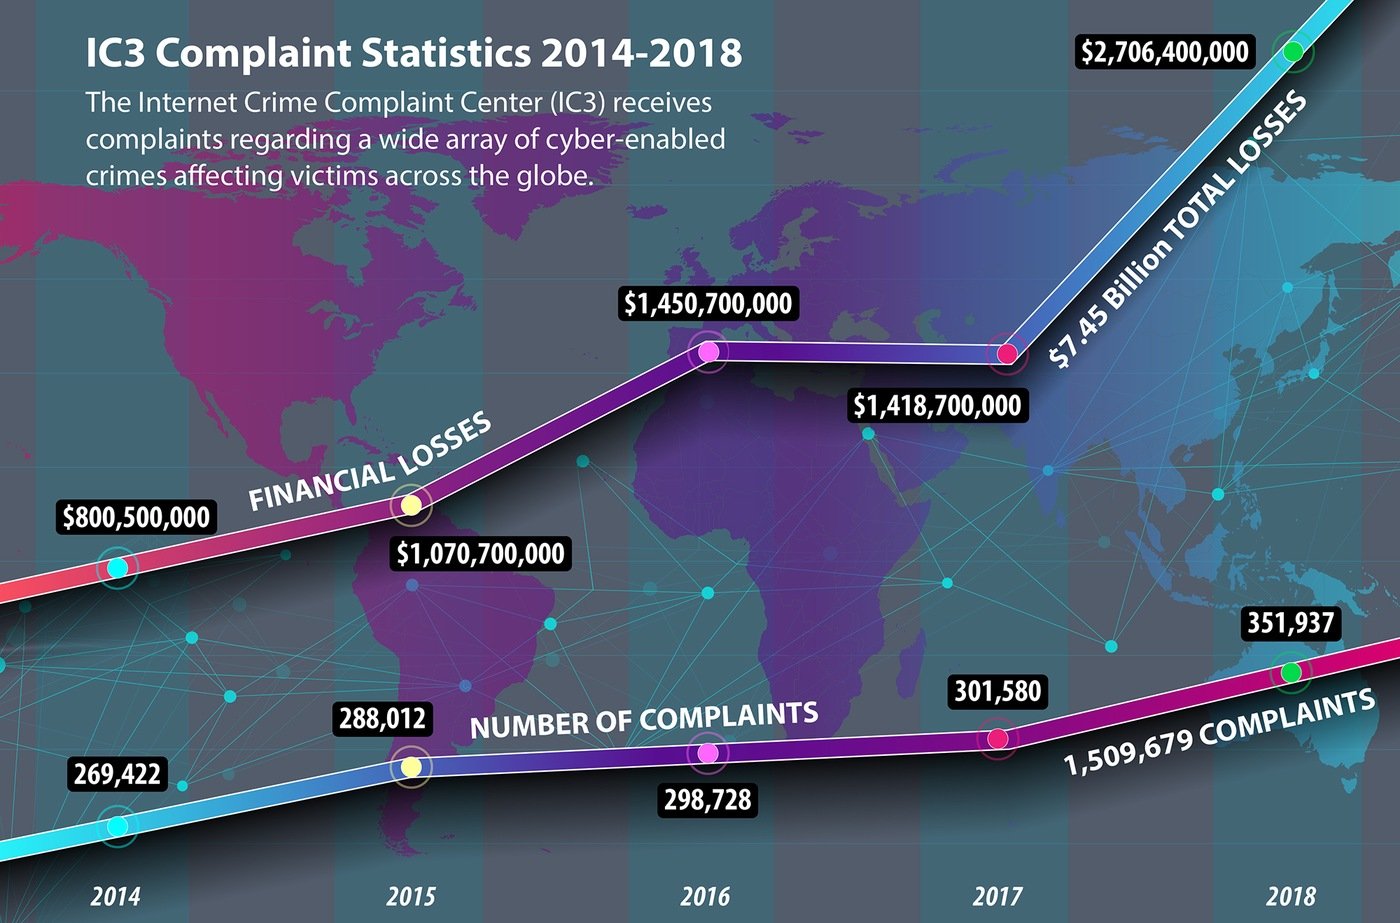 Infographic using 2014 - 2018 financial losses and complaint numbers from the 2018 Internet Crime Report, released by the Internet Crime Complaint Center (IC3).